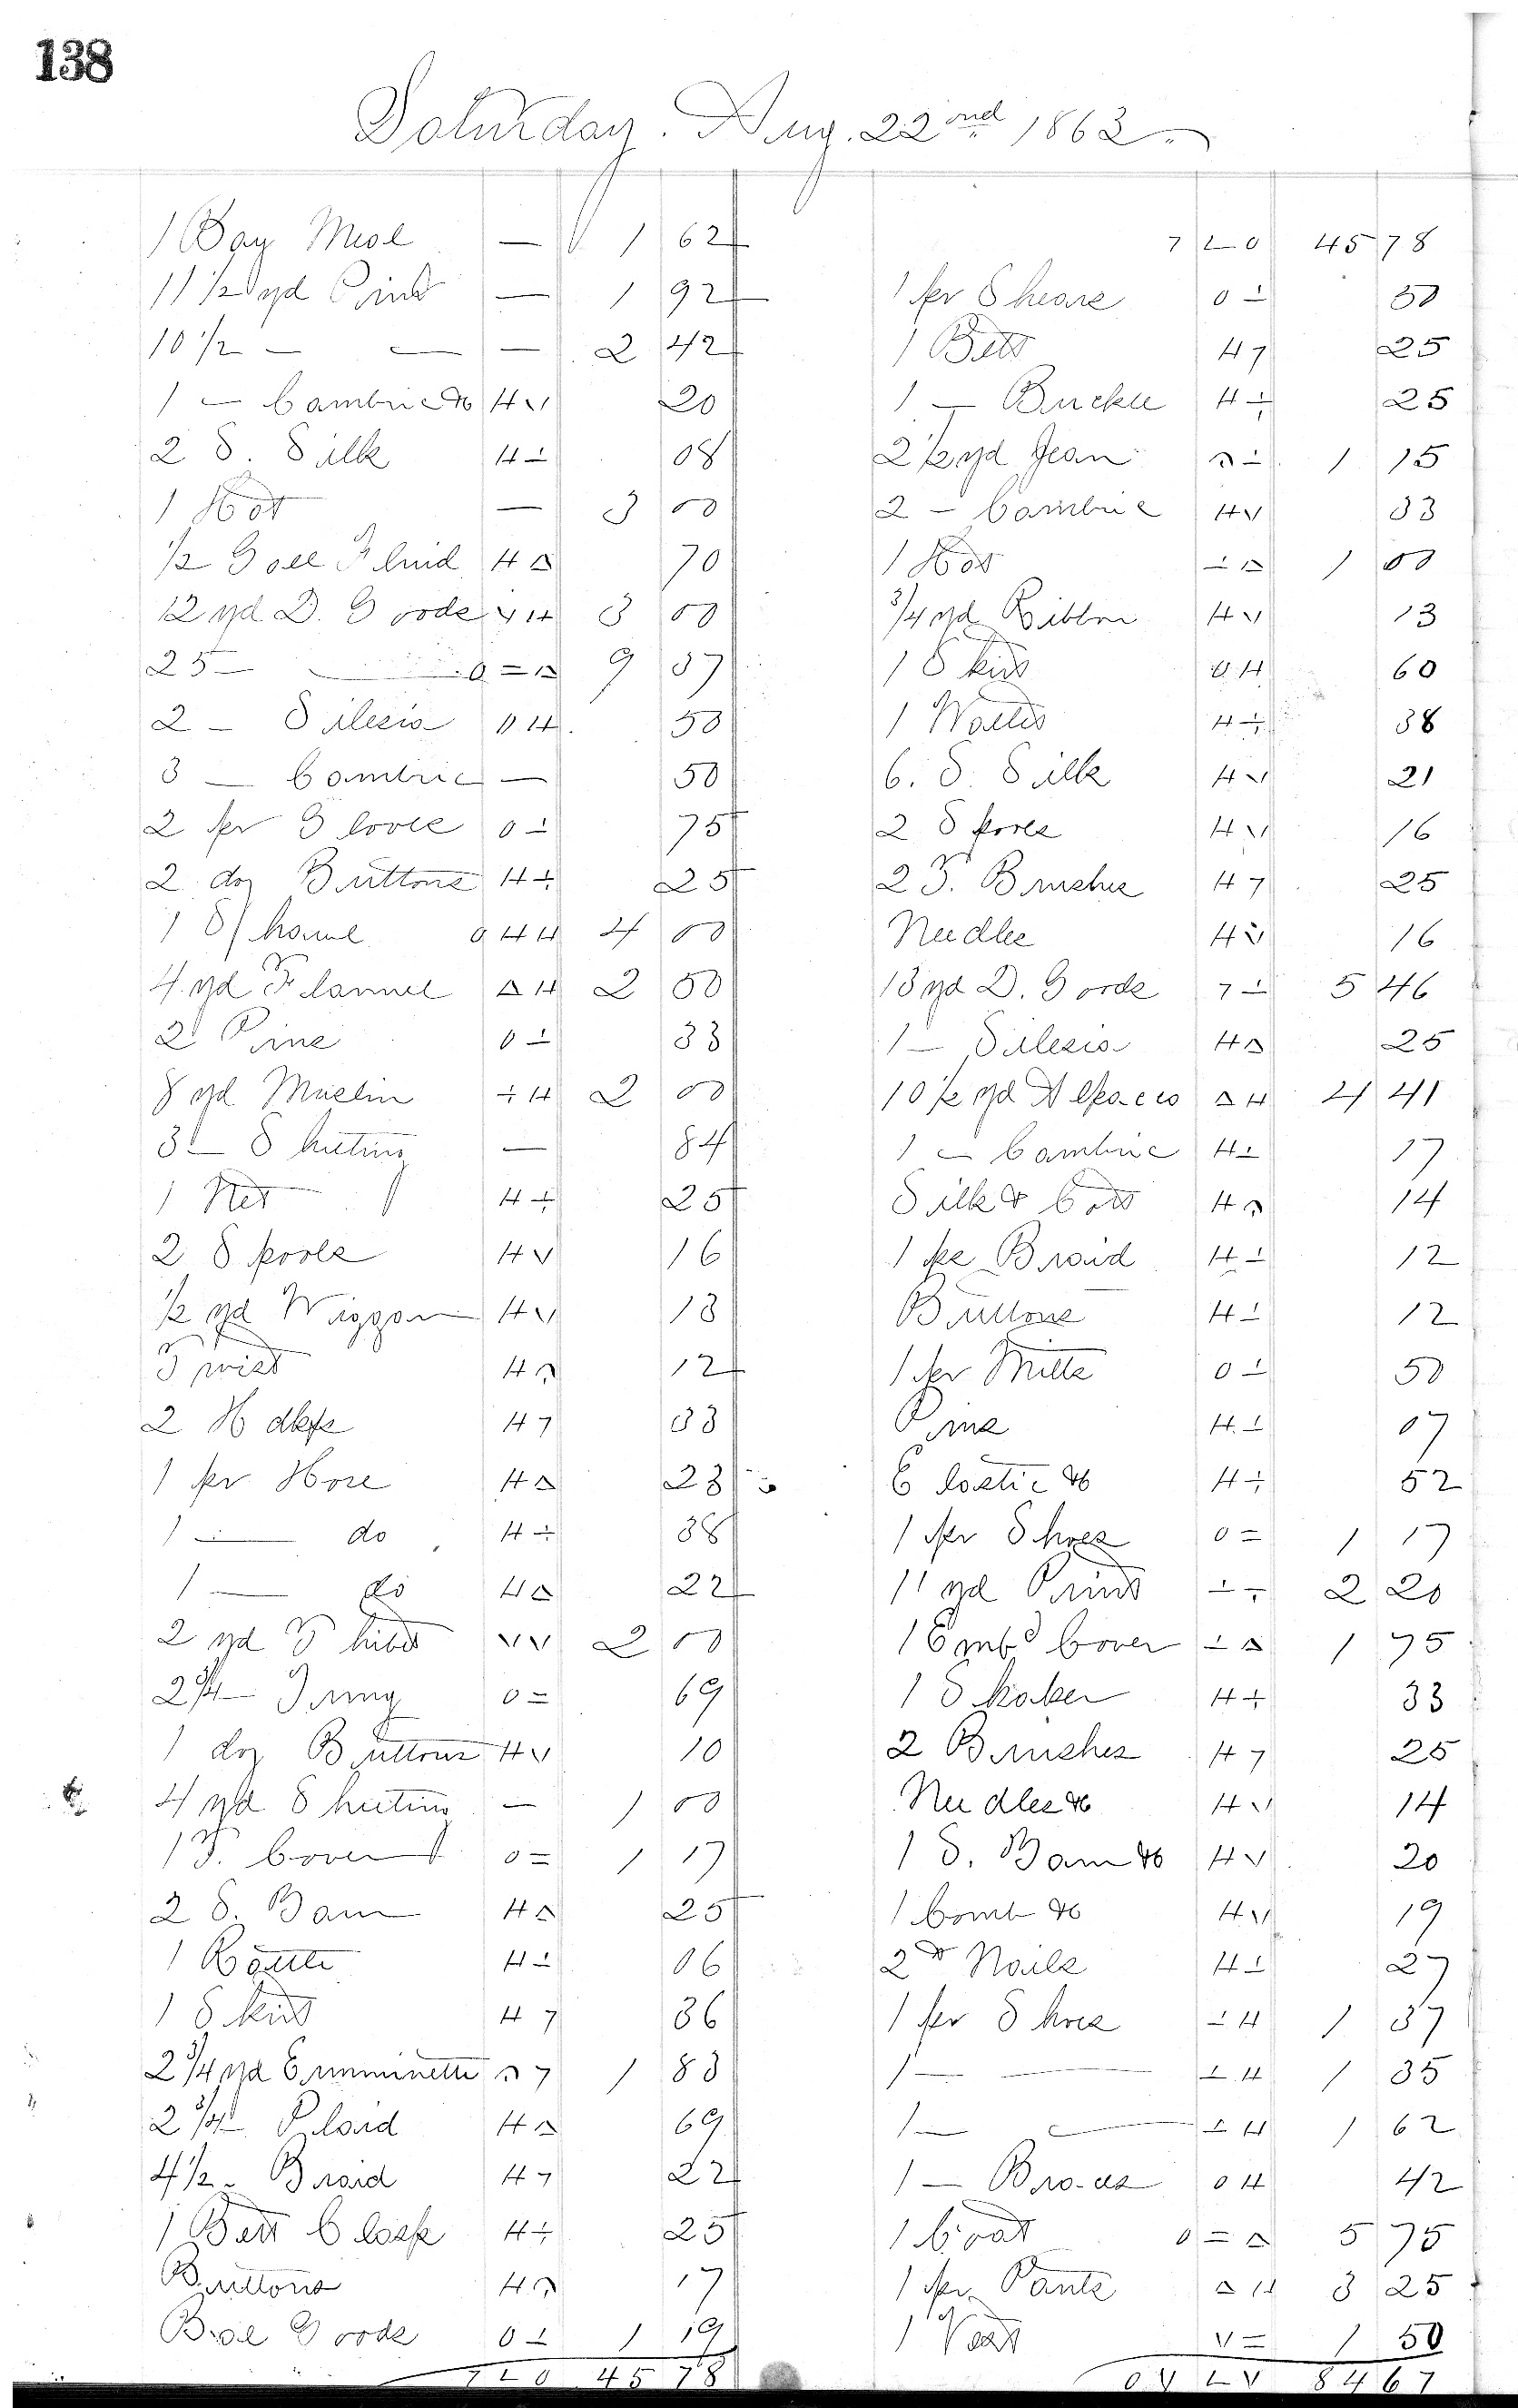 Page 138 from H.K. Keith's 1863 register of daily sales